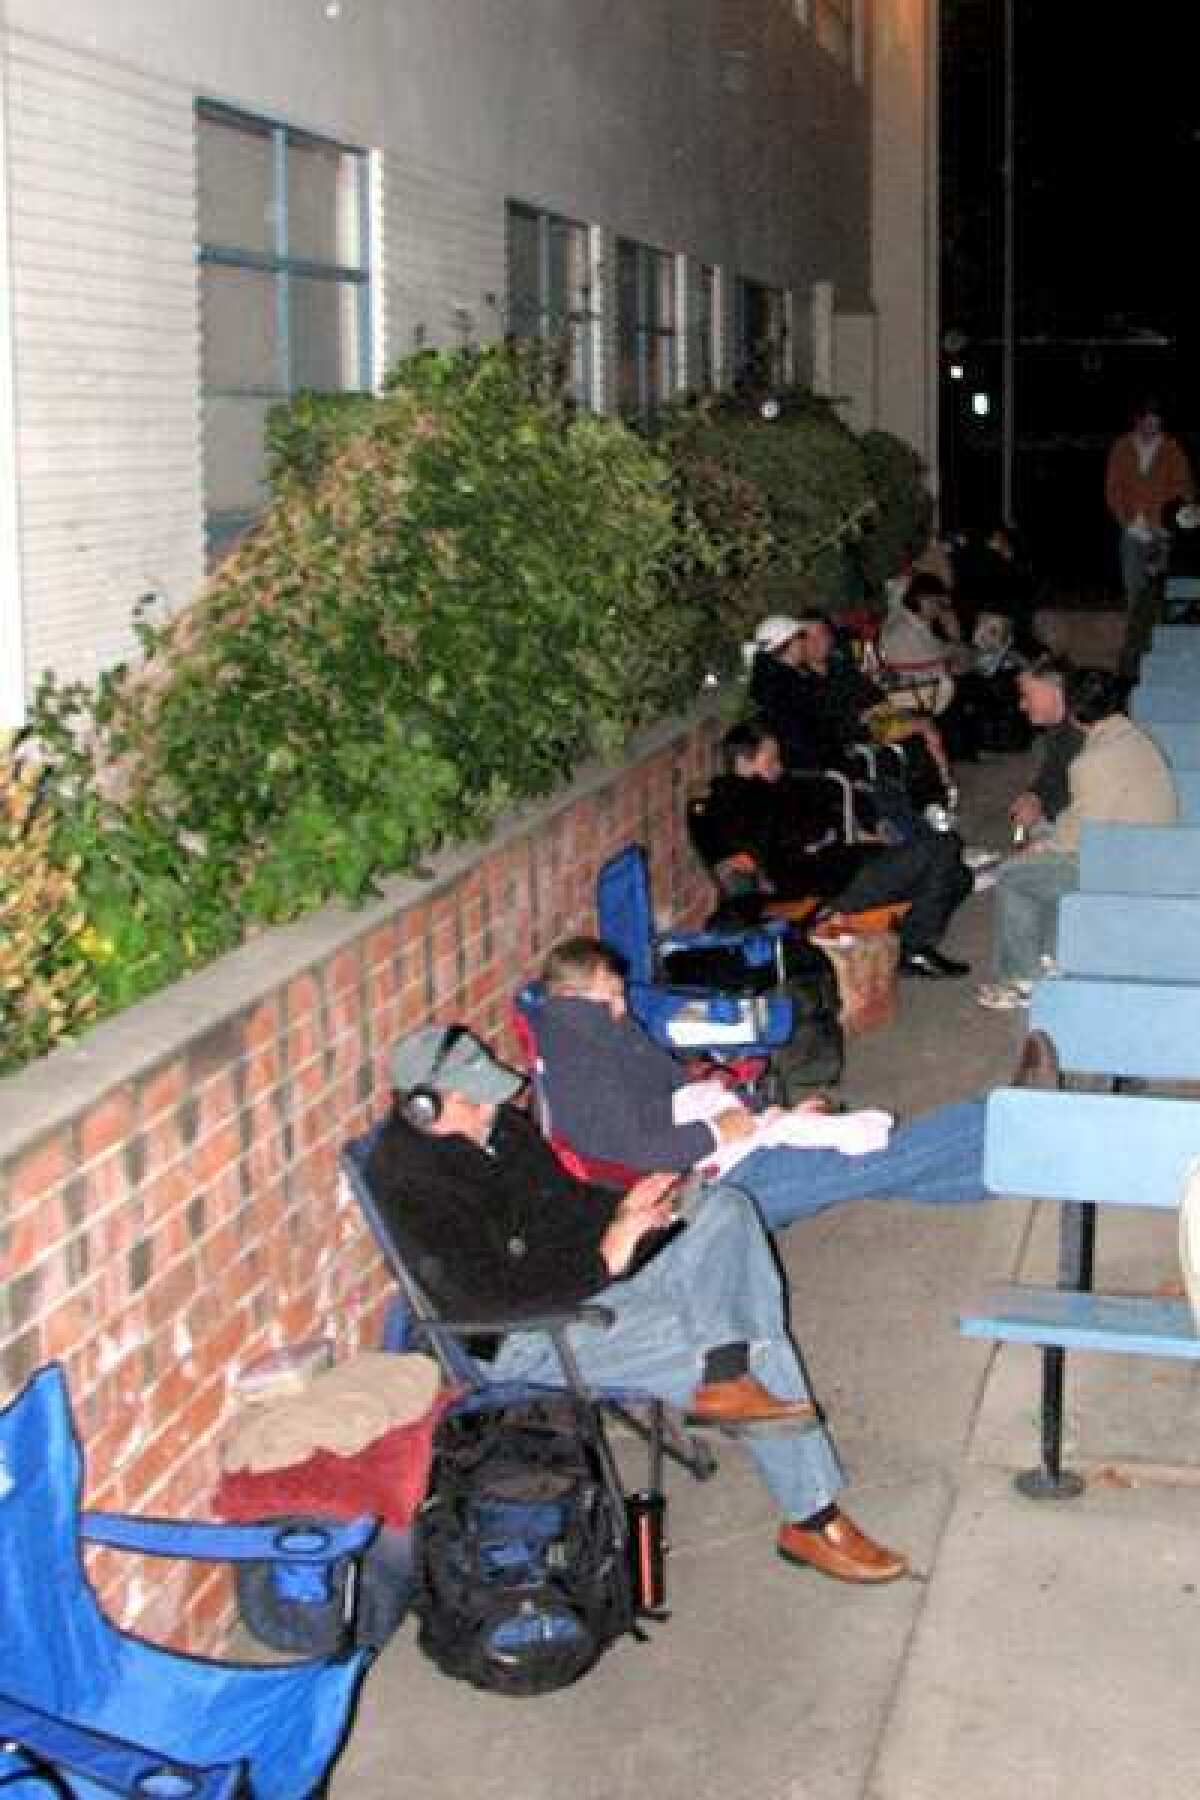 ARCHIVE PHOTO: Parents hoping to enroll their children in LCUSD schools camped outside district headquarters.